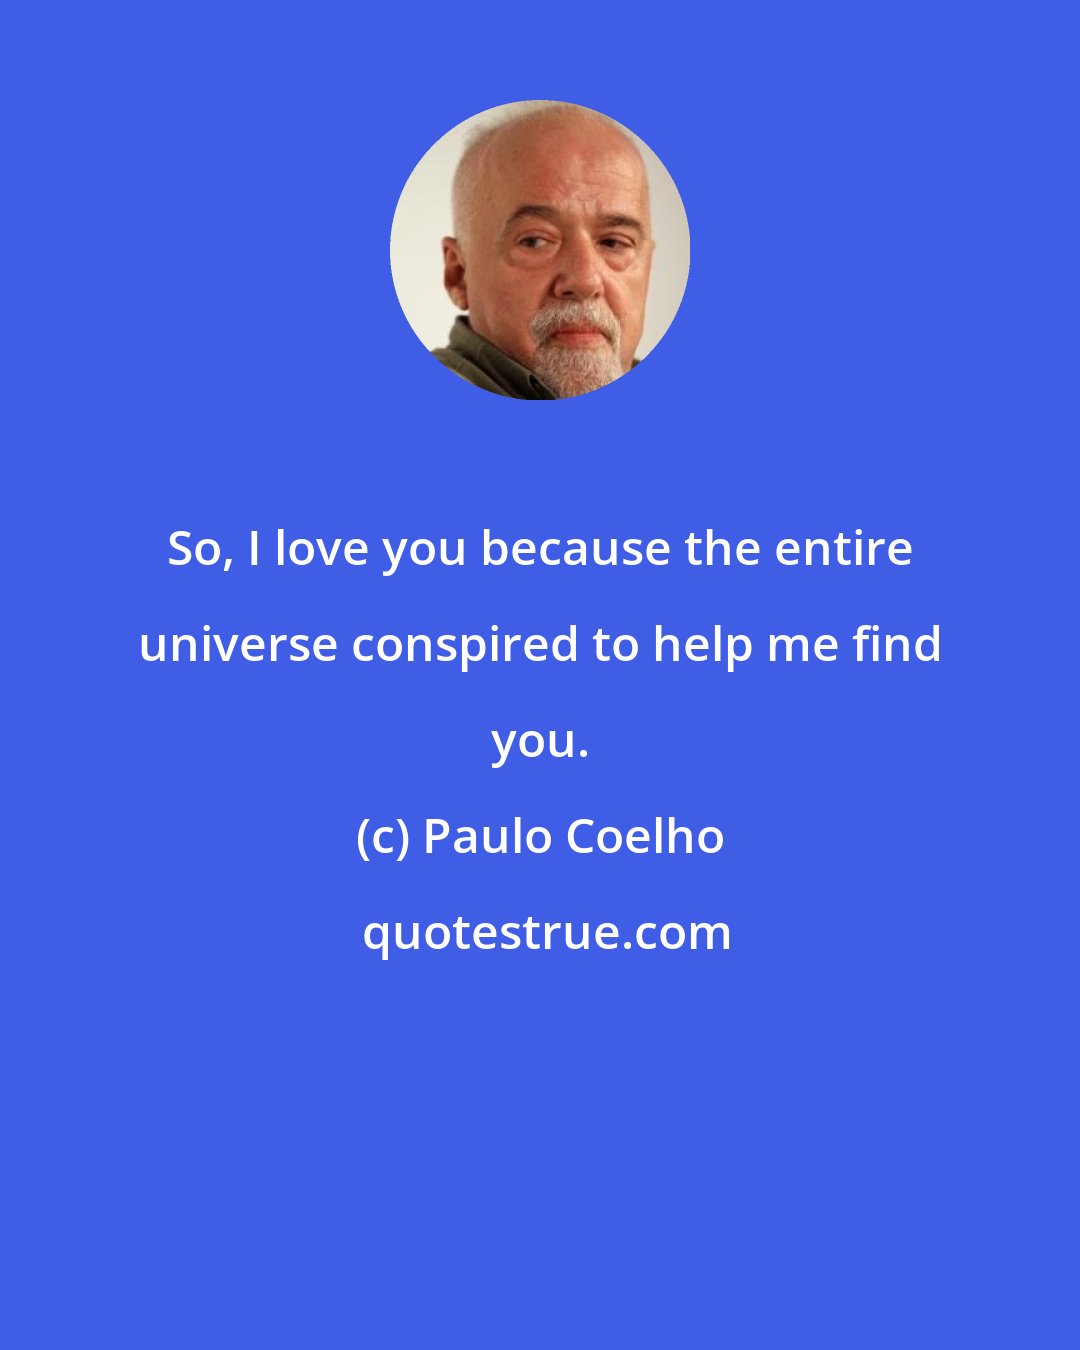 Paulo Coelho: So, I love you because the entire universe conspired to help me find you.